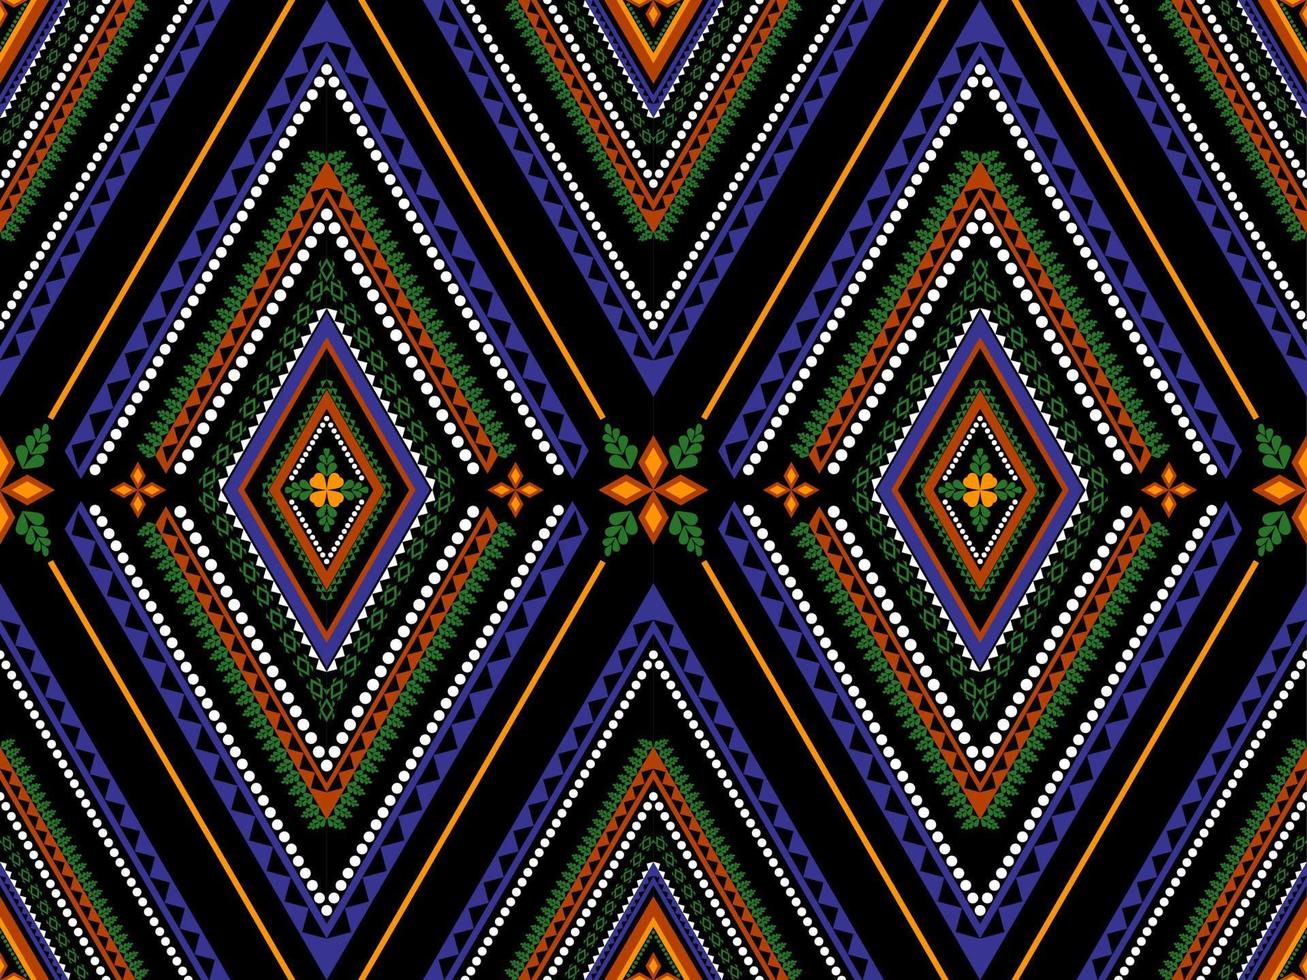 Geometric ethnic seamless pattern traditional. Design for background, wallpaper, vector illustration, fabric, clothing, batik, carpet, embroidery.